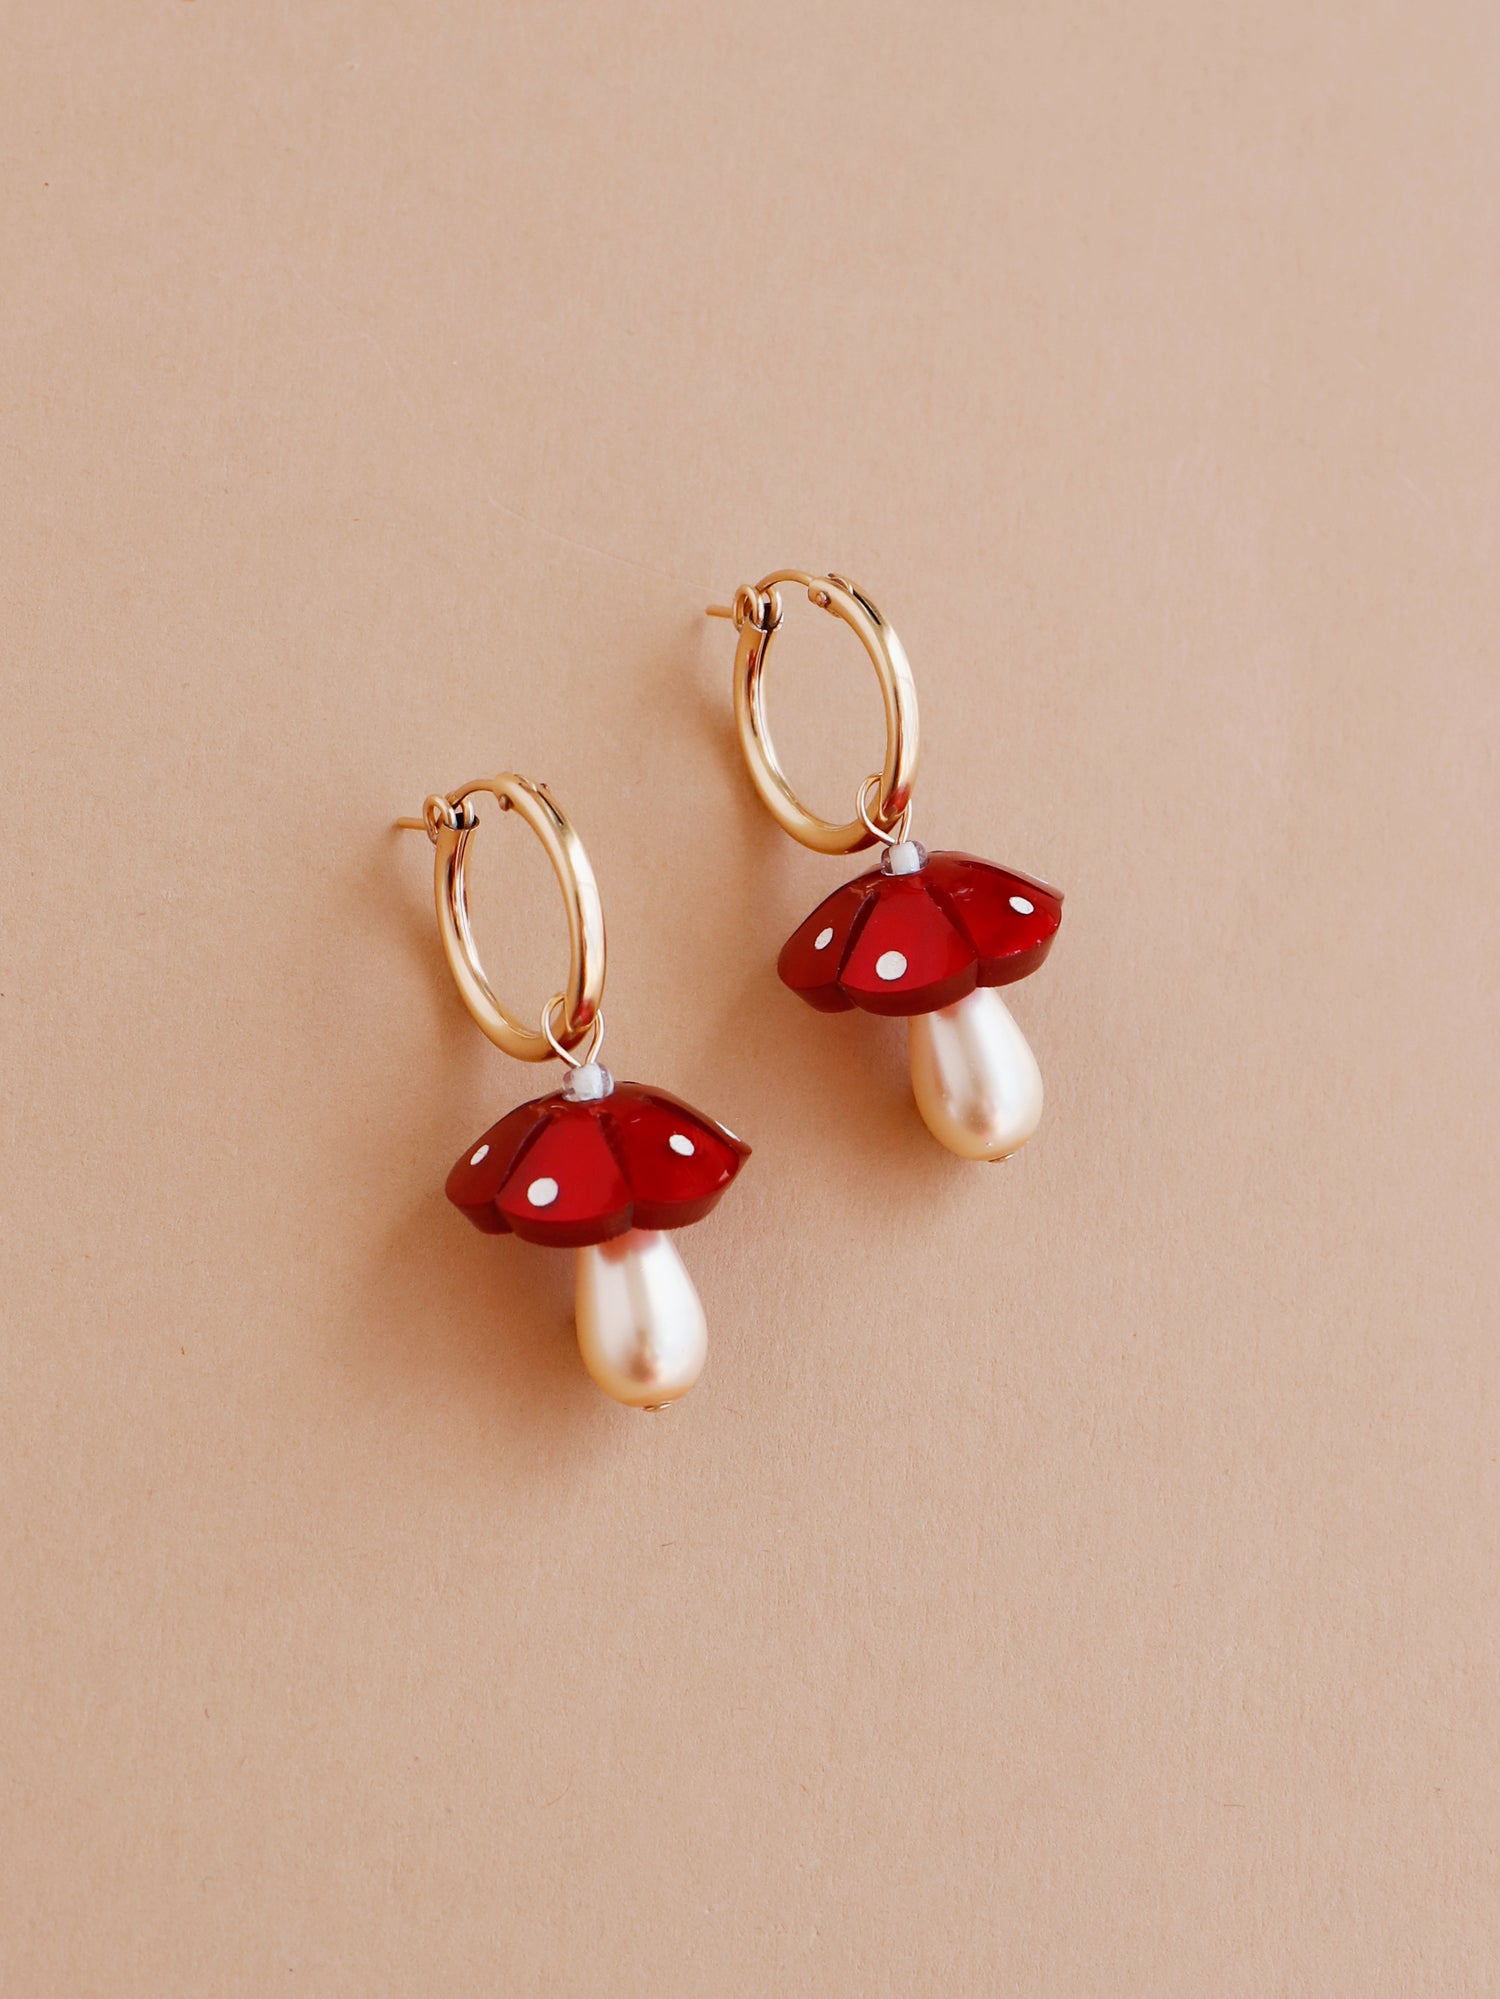 Red woodland mushroom charm hoops. Made from heat-formed acrylic with hand-inked details, and finished off with high quality Czech glass pearls and 14k gold-filled findings. Handmade in the UK by Wolf & Moon.